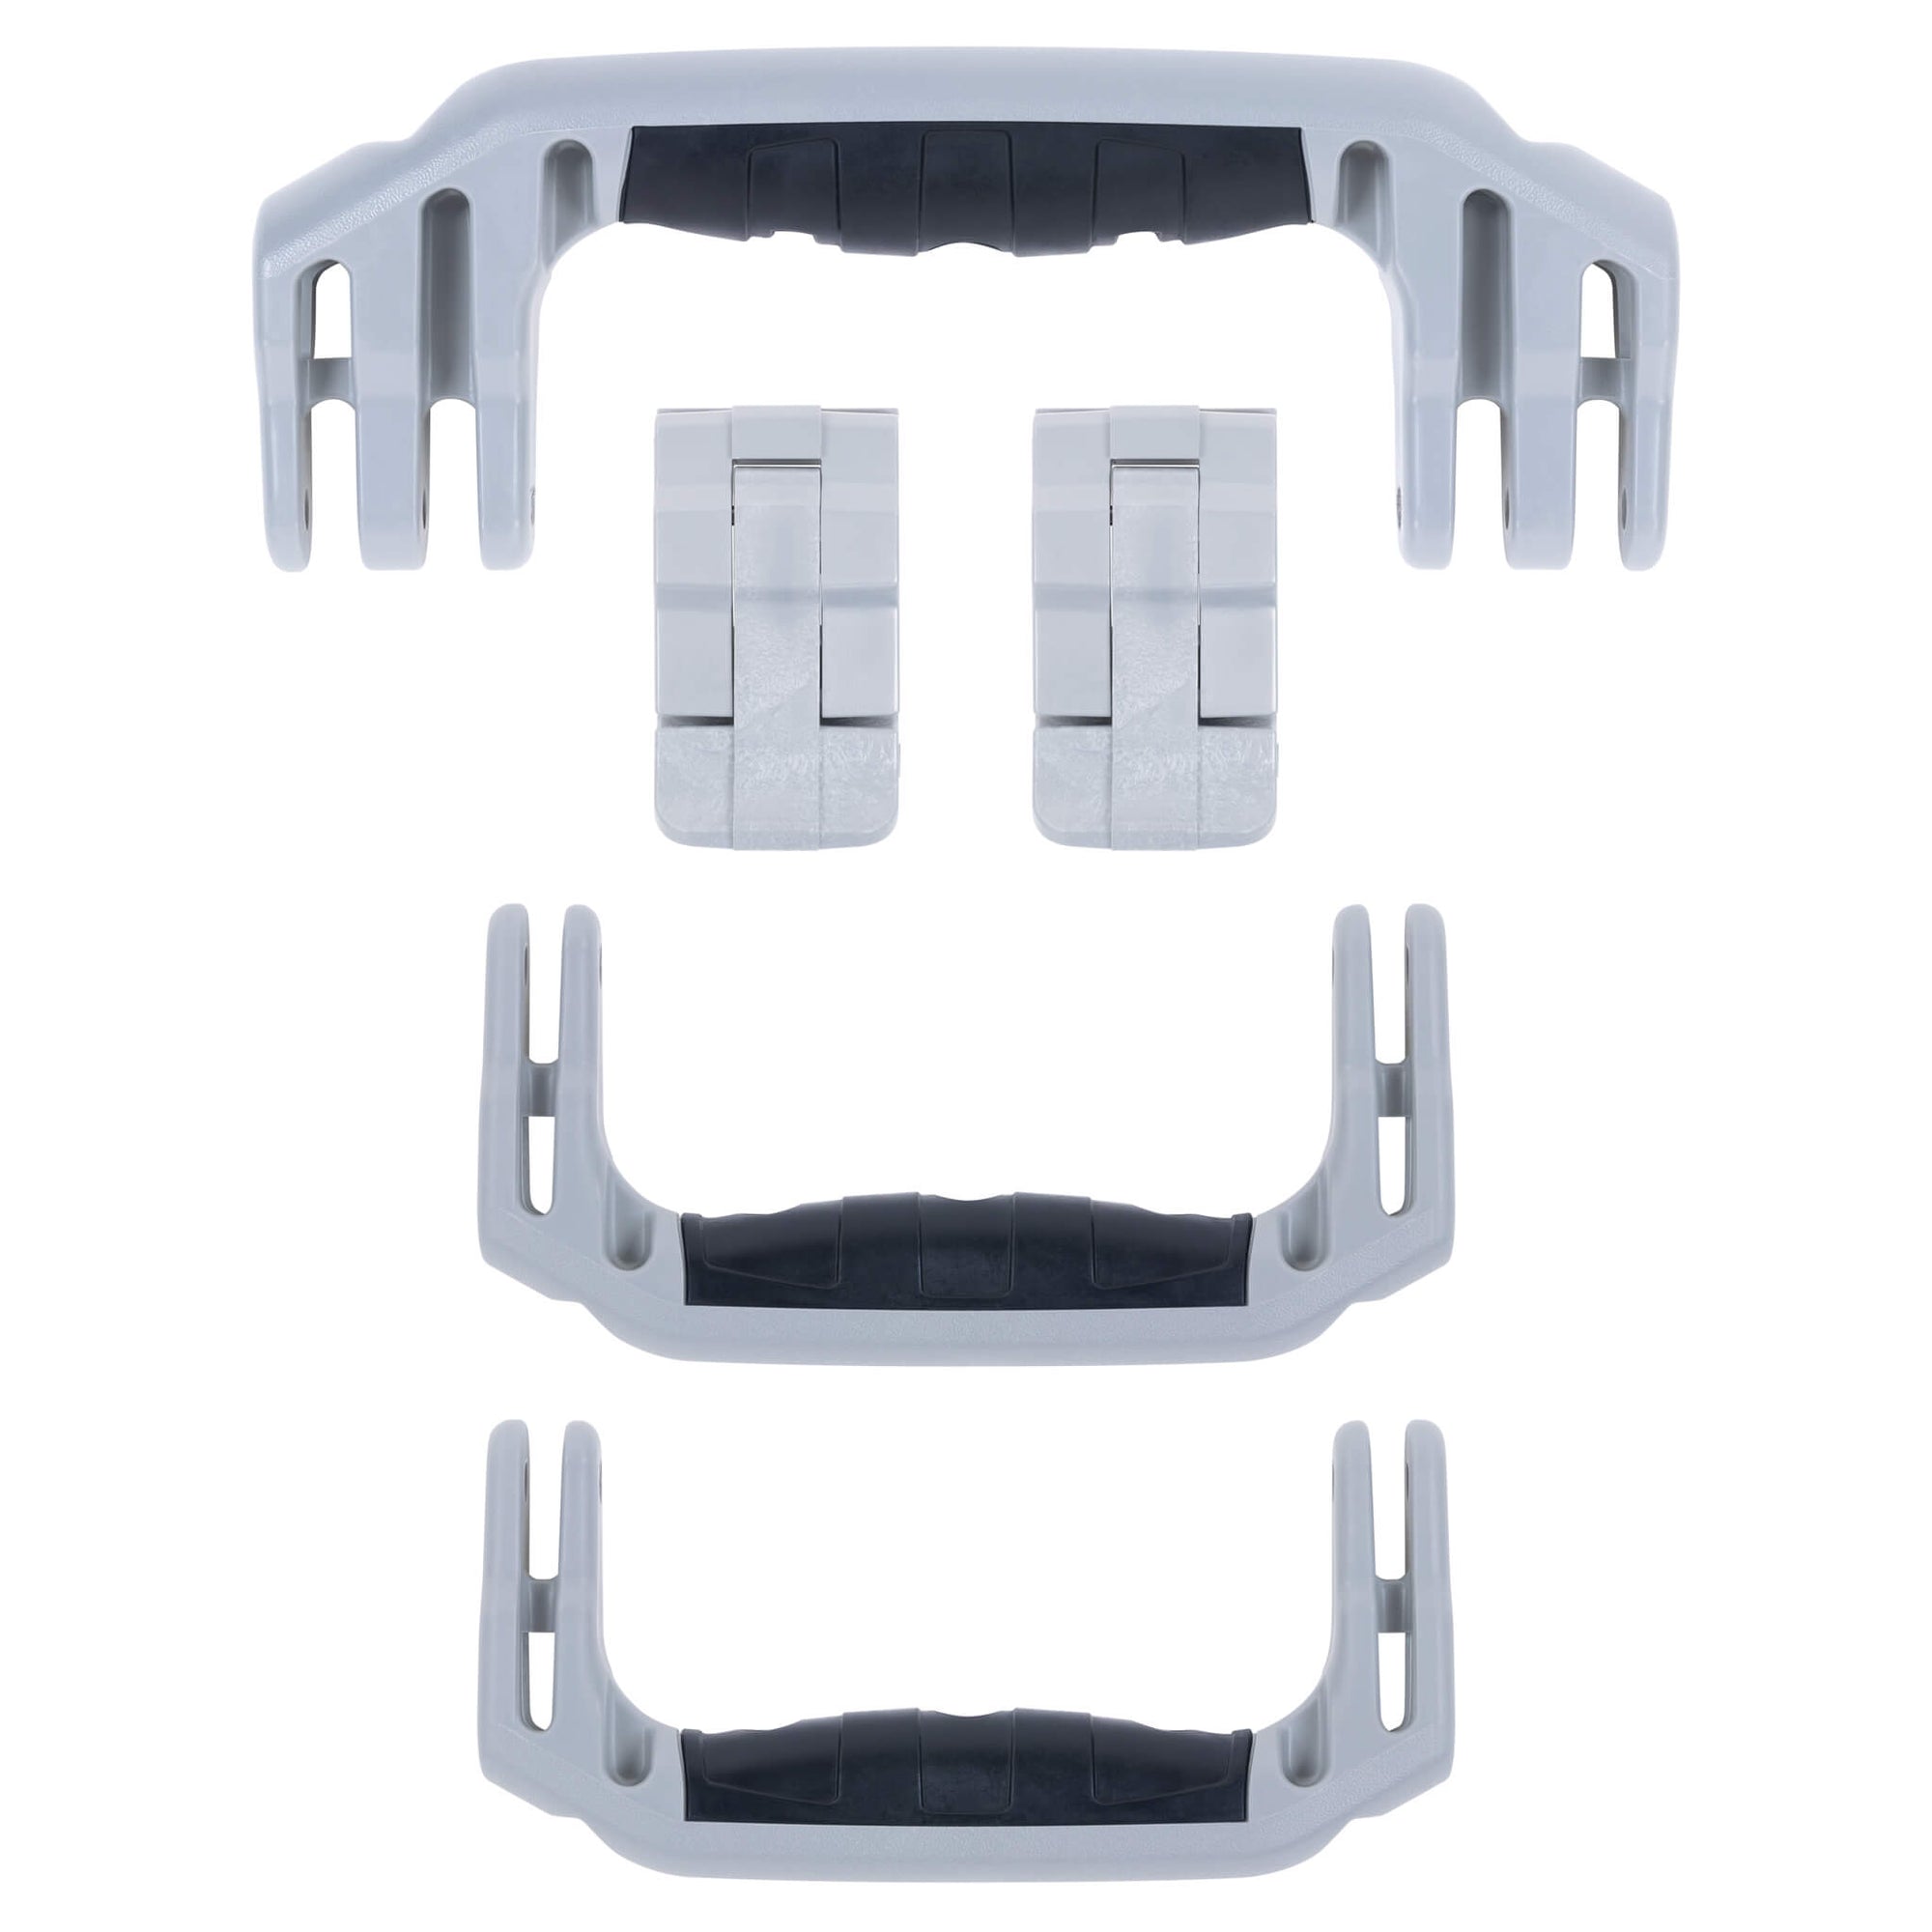 Pelican 1460 Replacement Handles & Latches, Silver (Set of 3 Handles, 2 Latches) ColorCase 